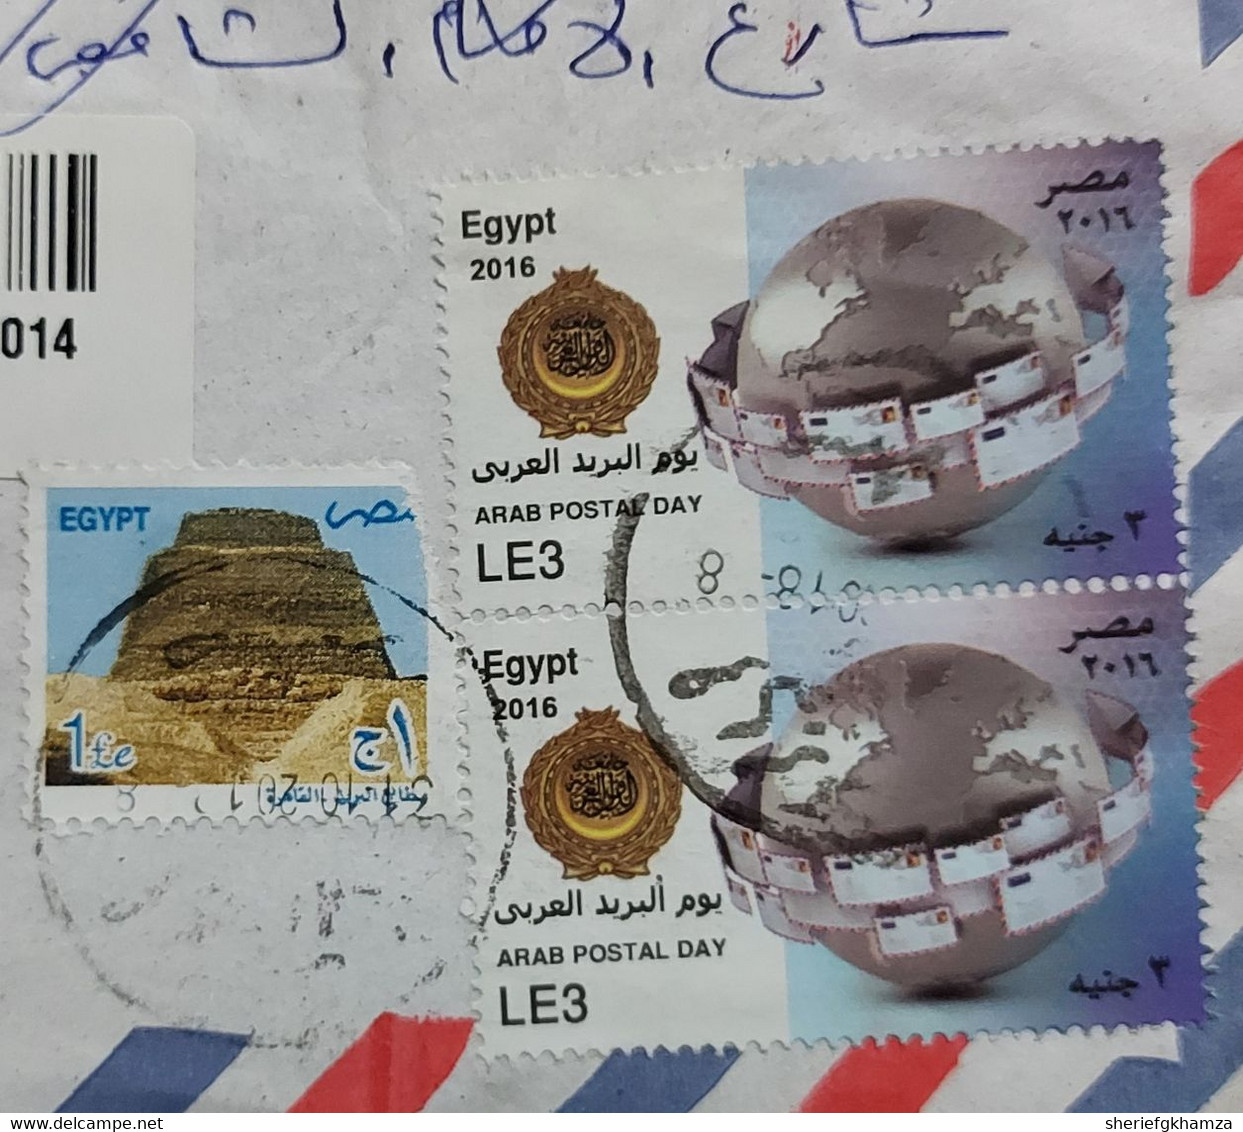 Egypt 2018 Cover With Arab Postal Day And Saqara Pyramid  Stamps  Travel From El Omranya To Eltalbya In Giza - Covers & Documents